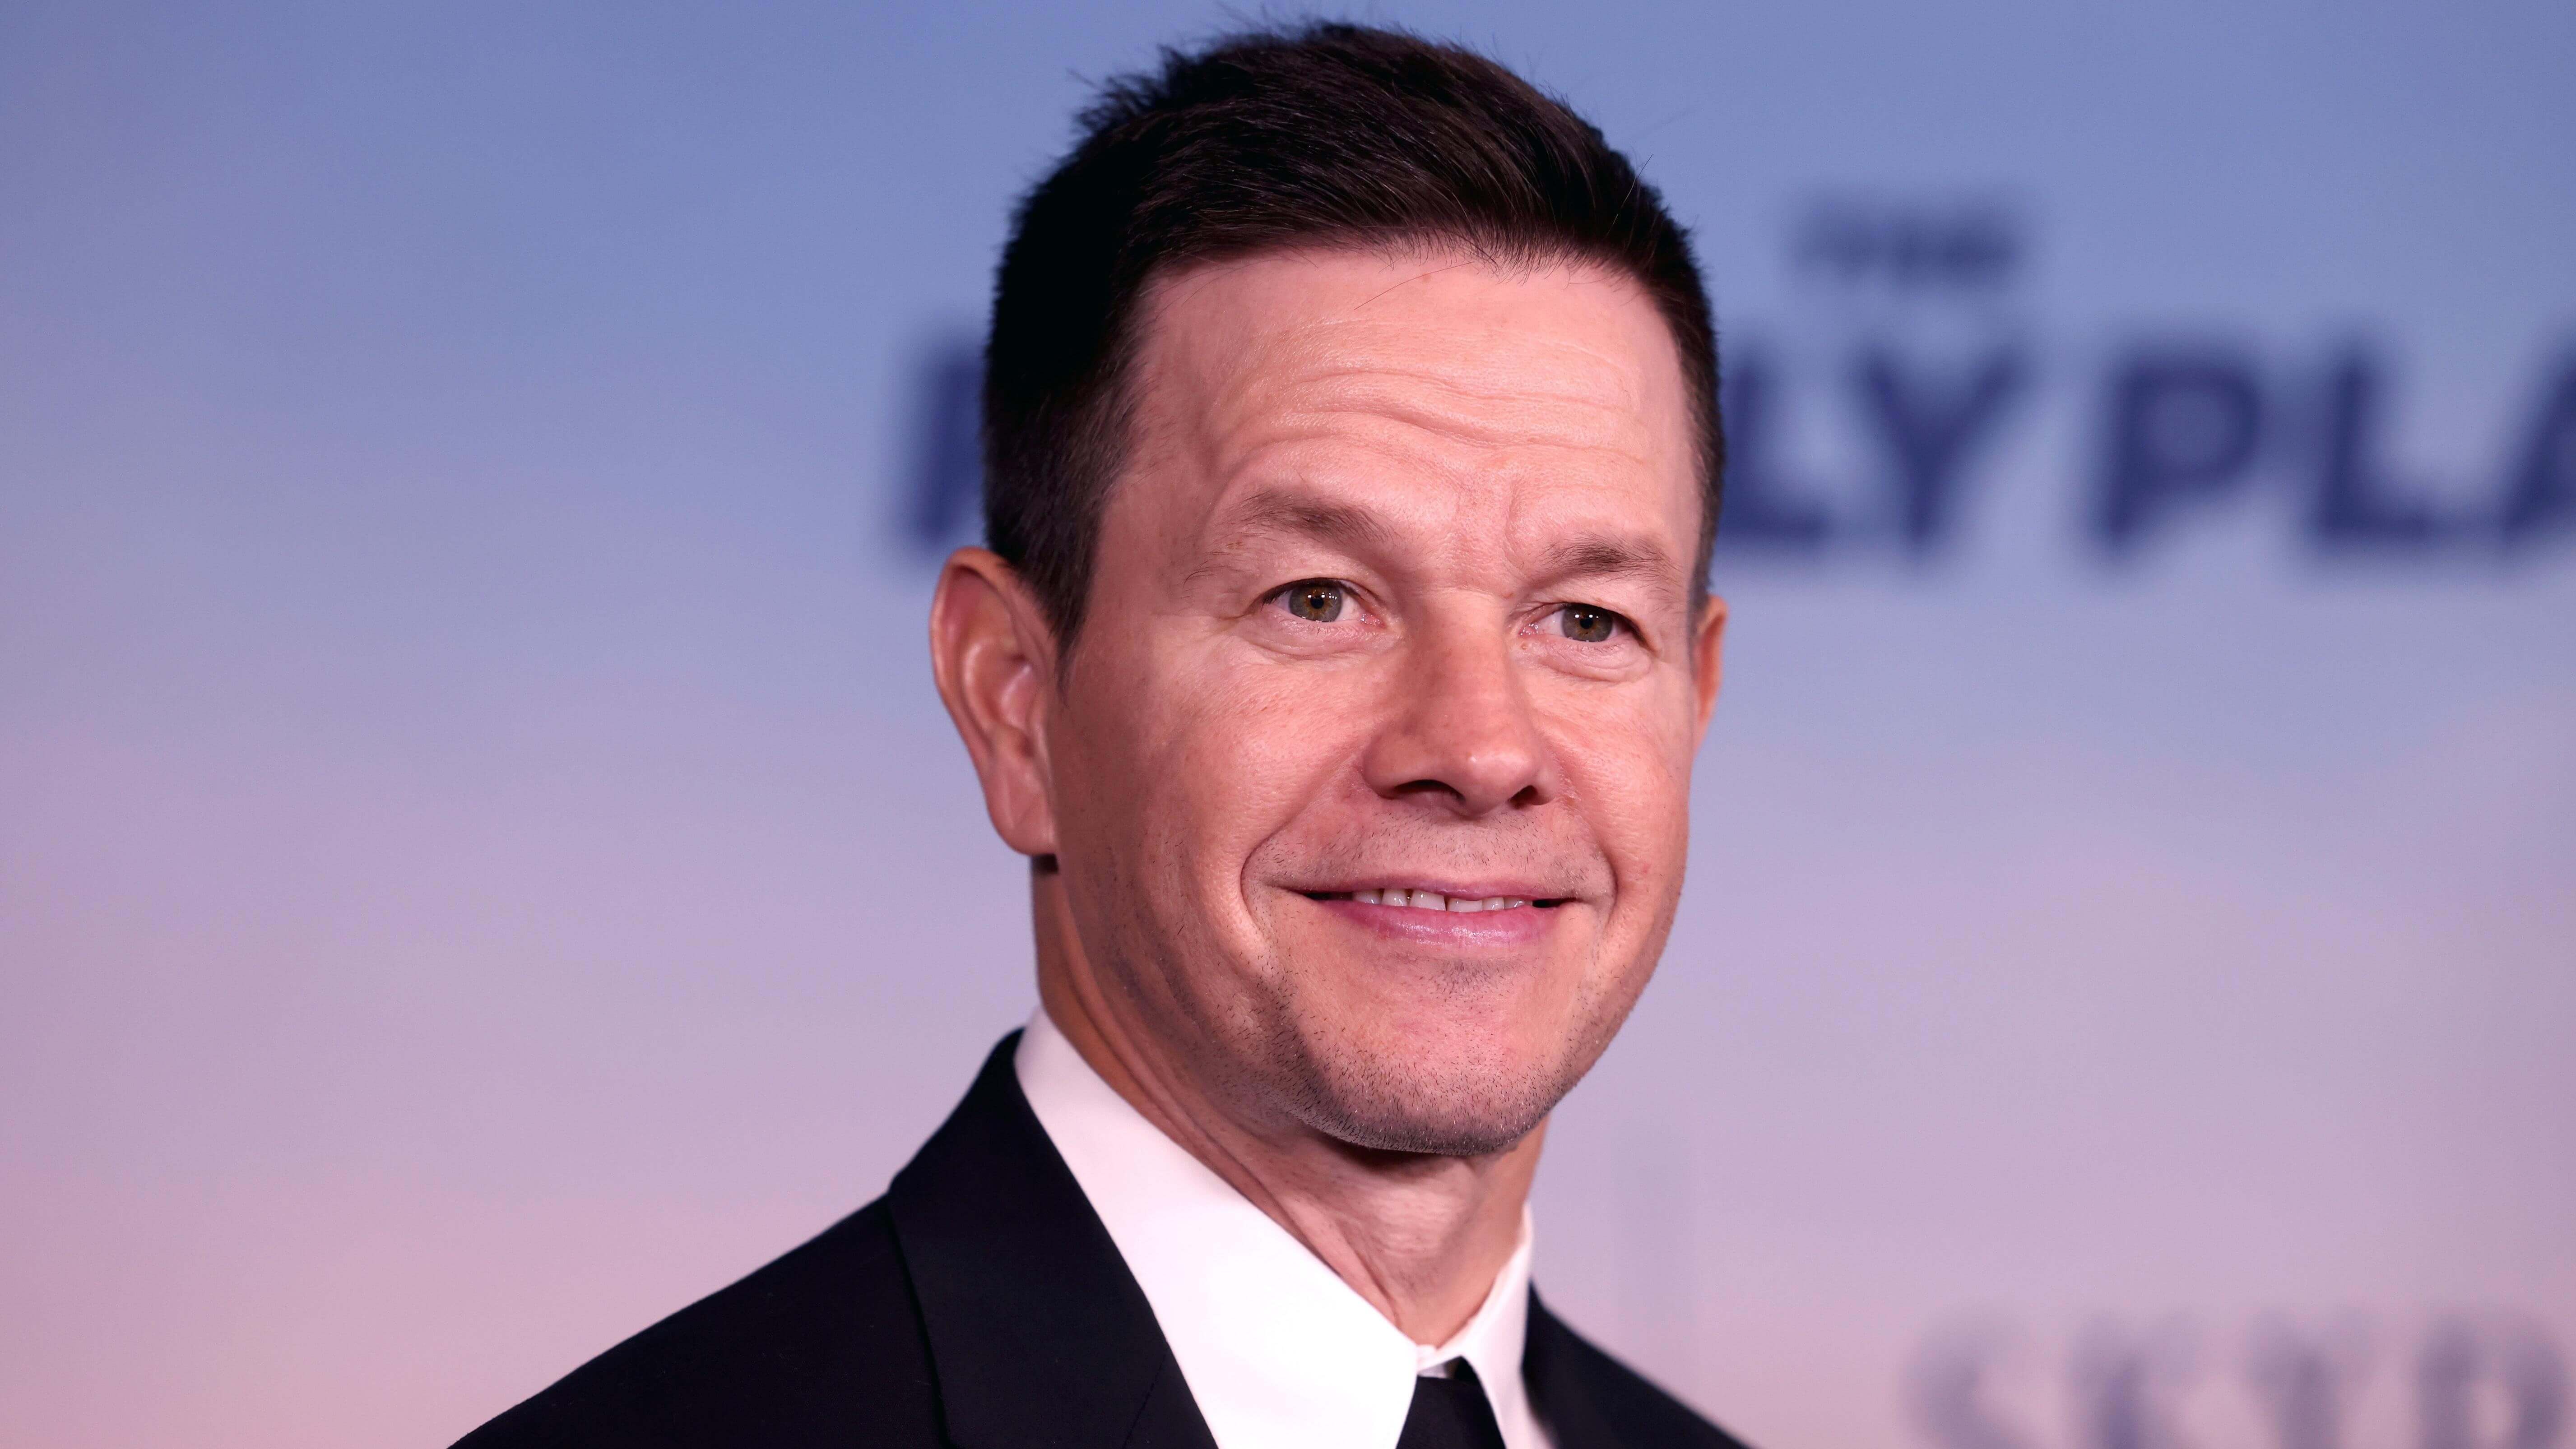 Mark Wahlberg only wants “age-appropriate roles” now, which means playing the dad in family movies